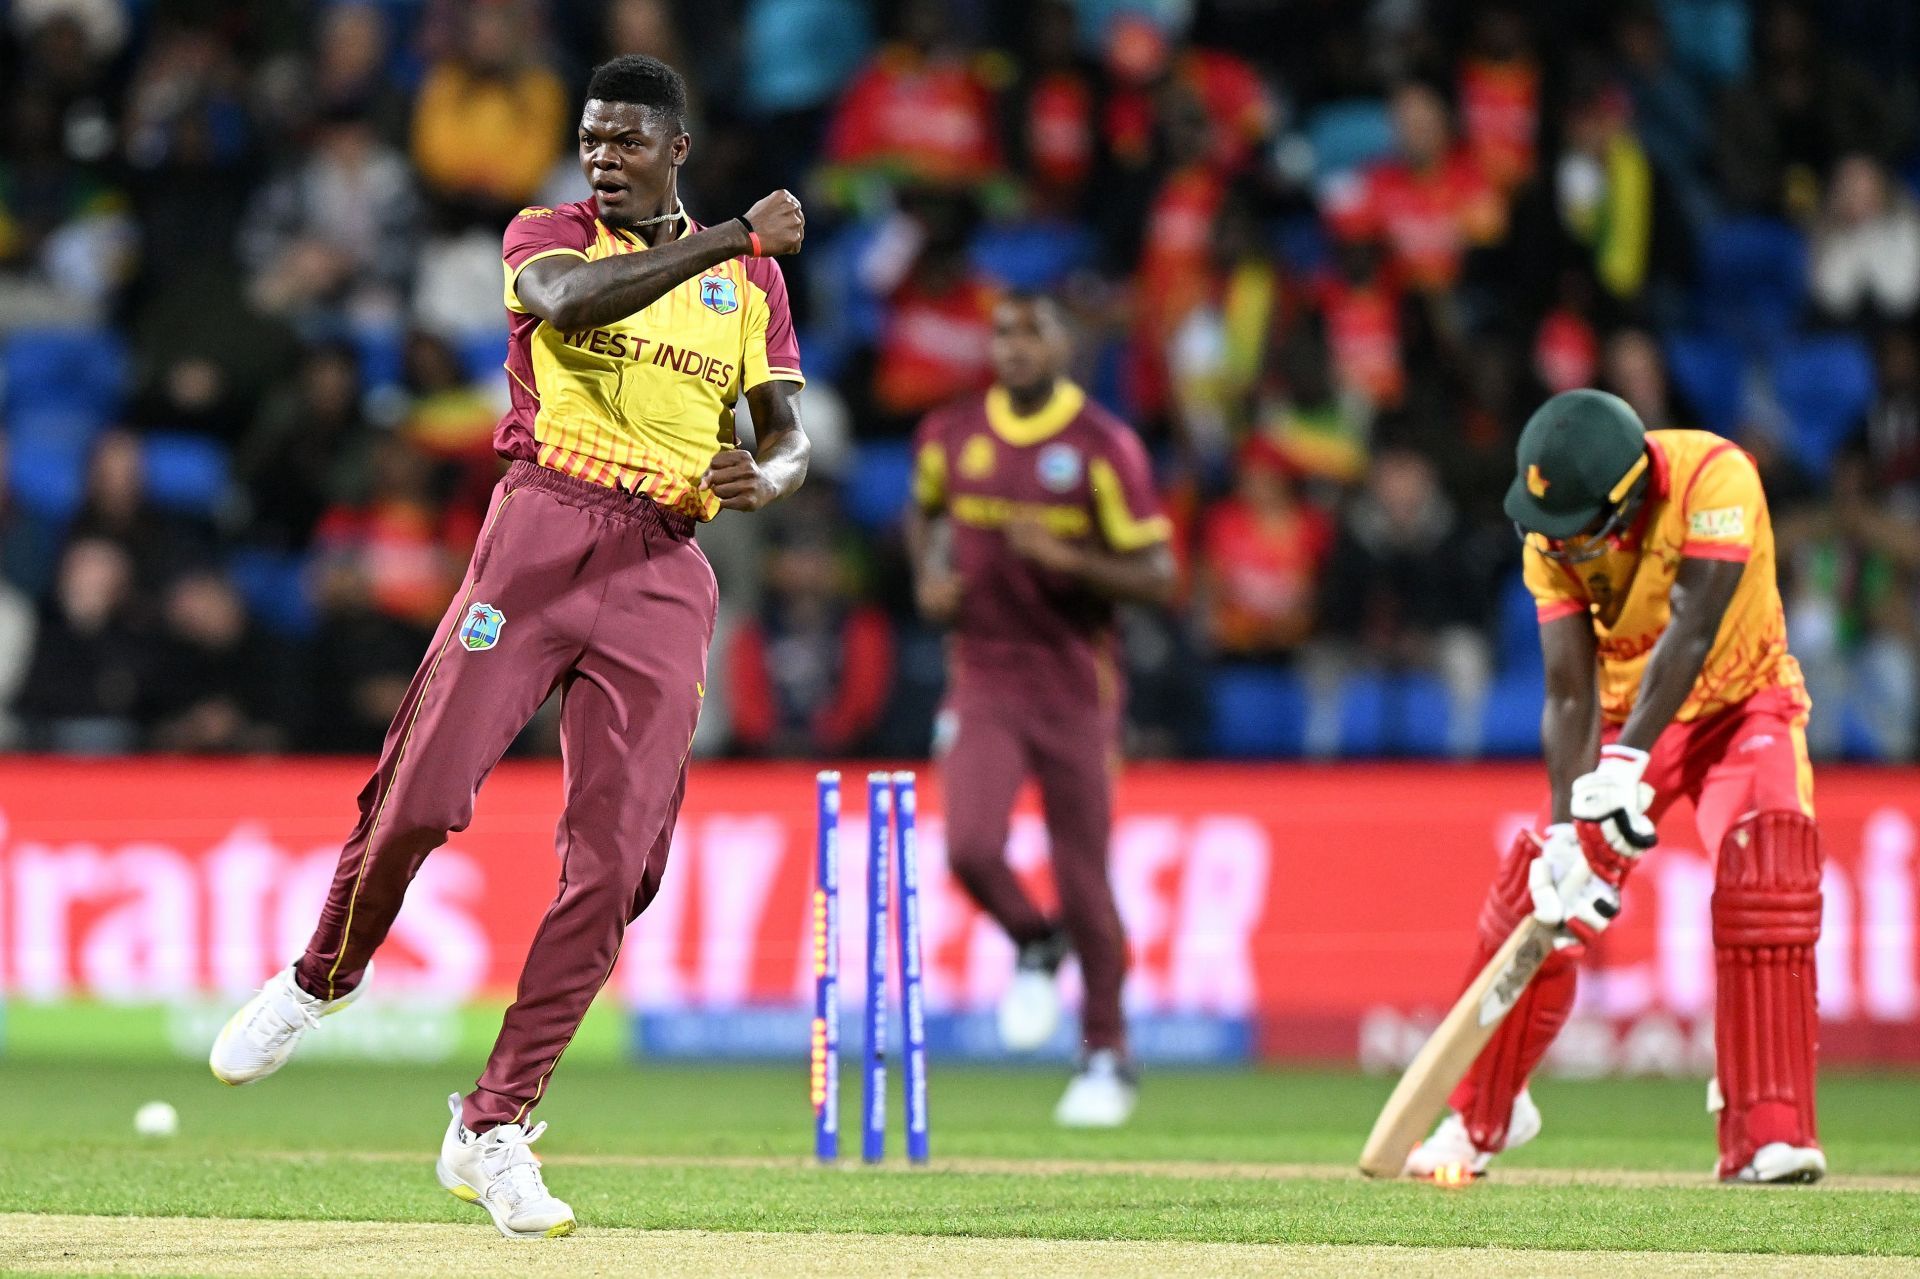 Can West Indies progress to the Super 12 stage of T20 World Cup 2022? (Image: ICC/Twitter)